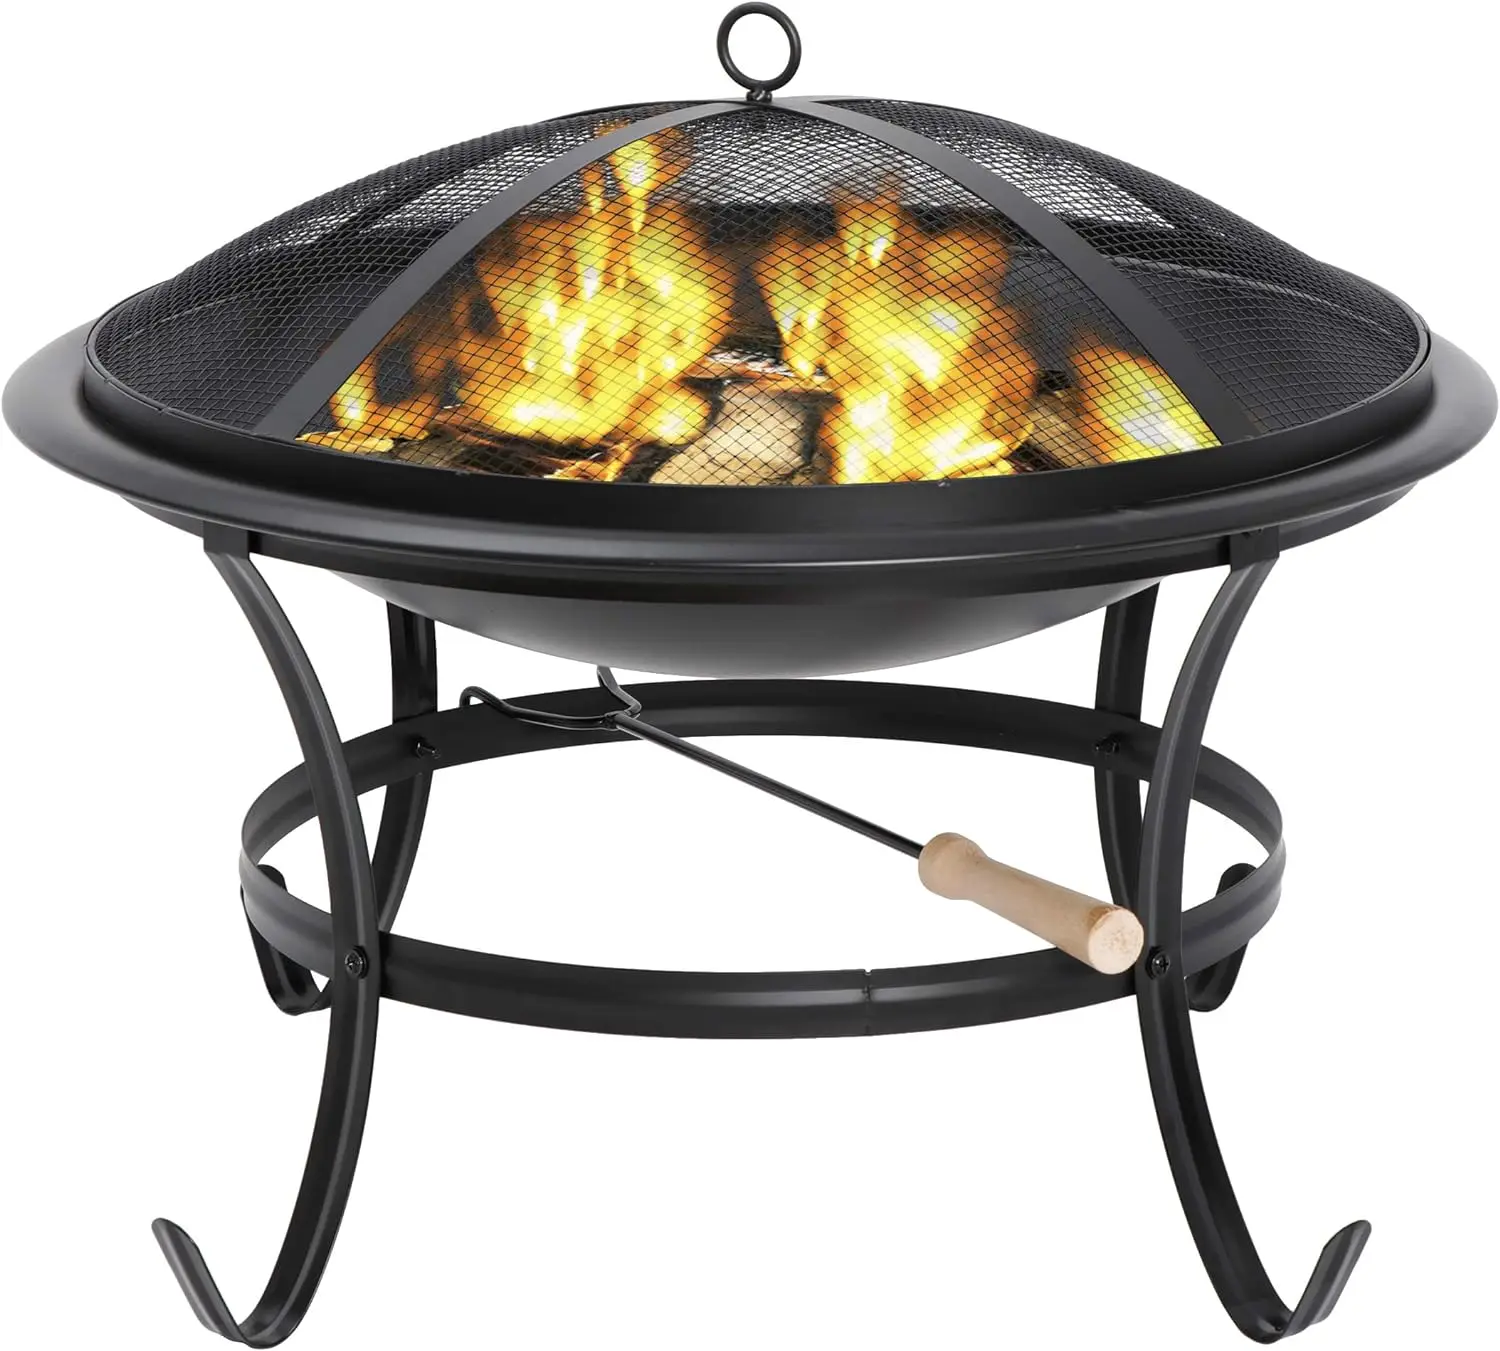 22" Portable Firepit Mini Round Fire Bowl w/,Screen Cover,Safety Metal Legs Fireplace for Backyard,Camping,Patio